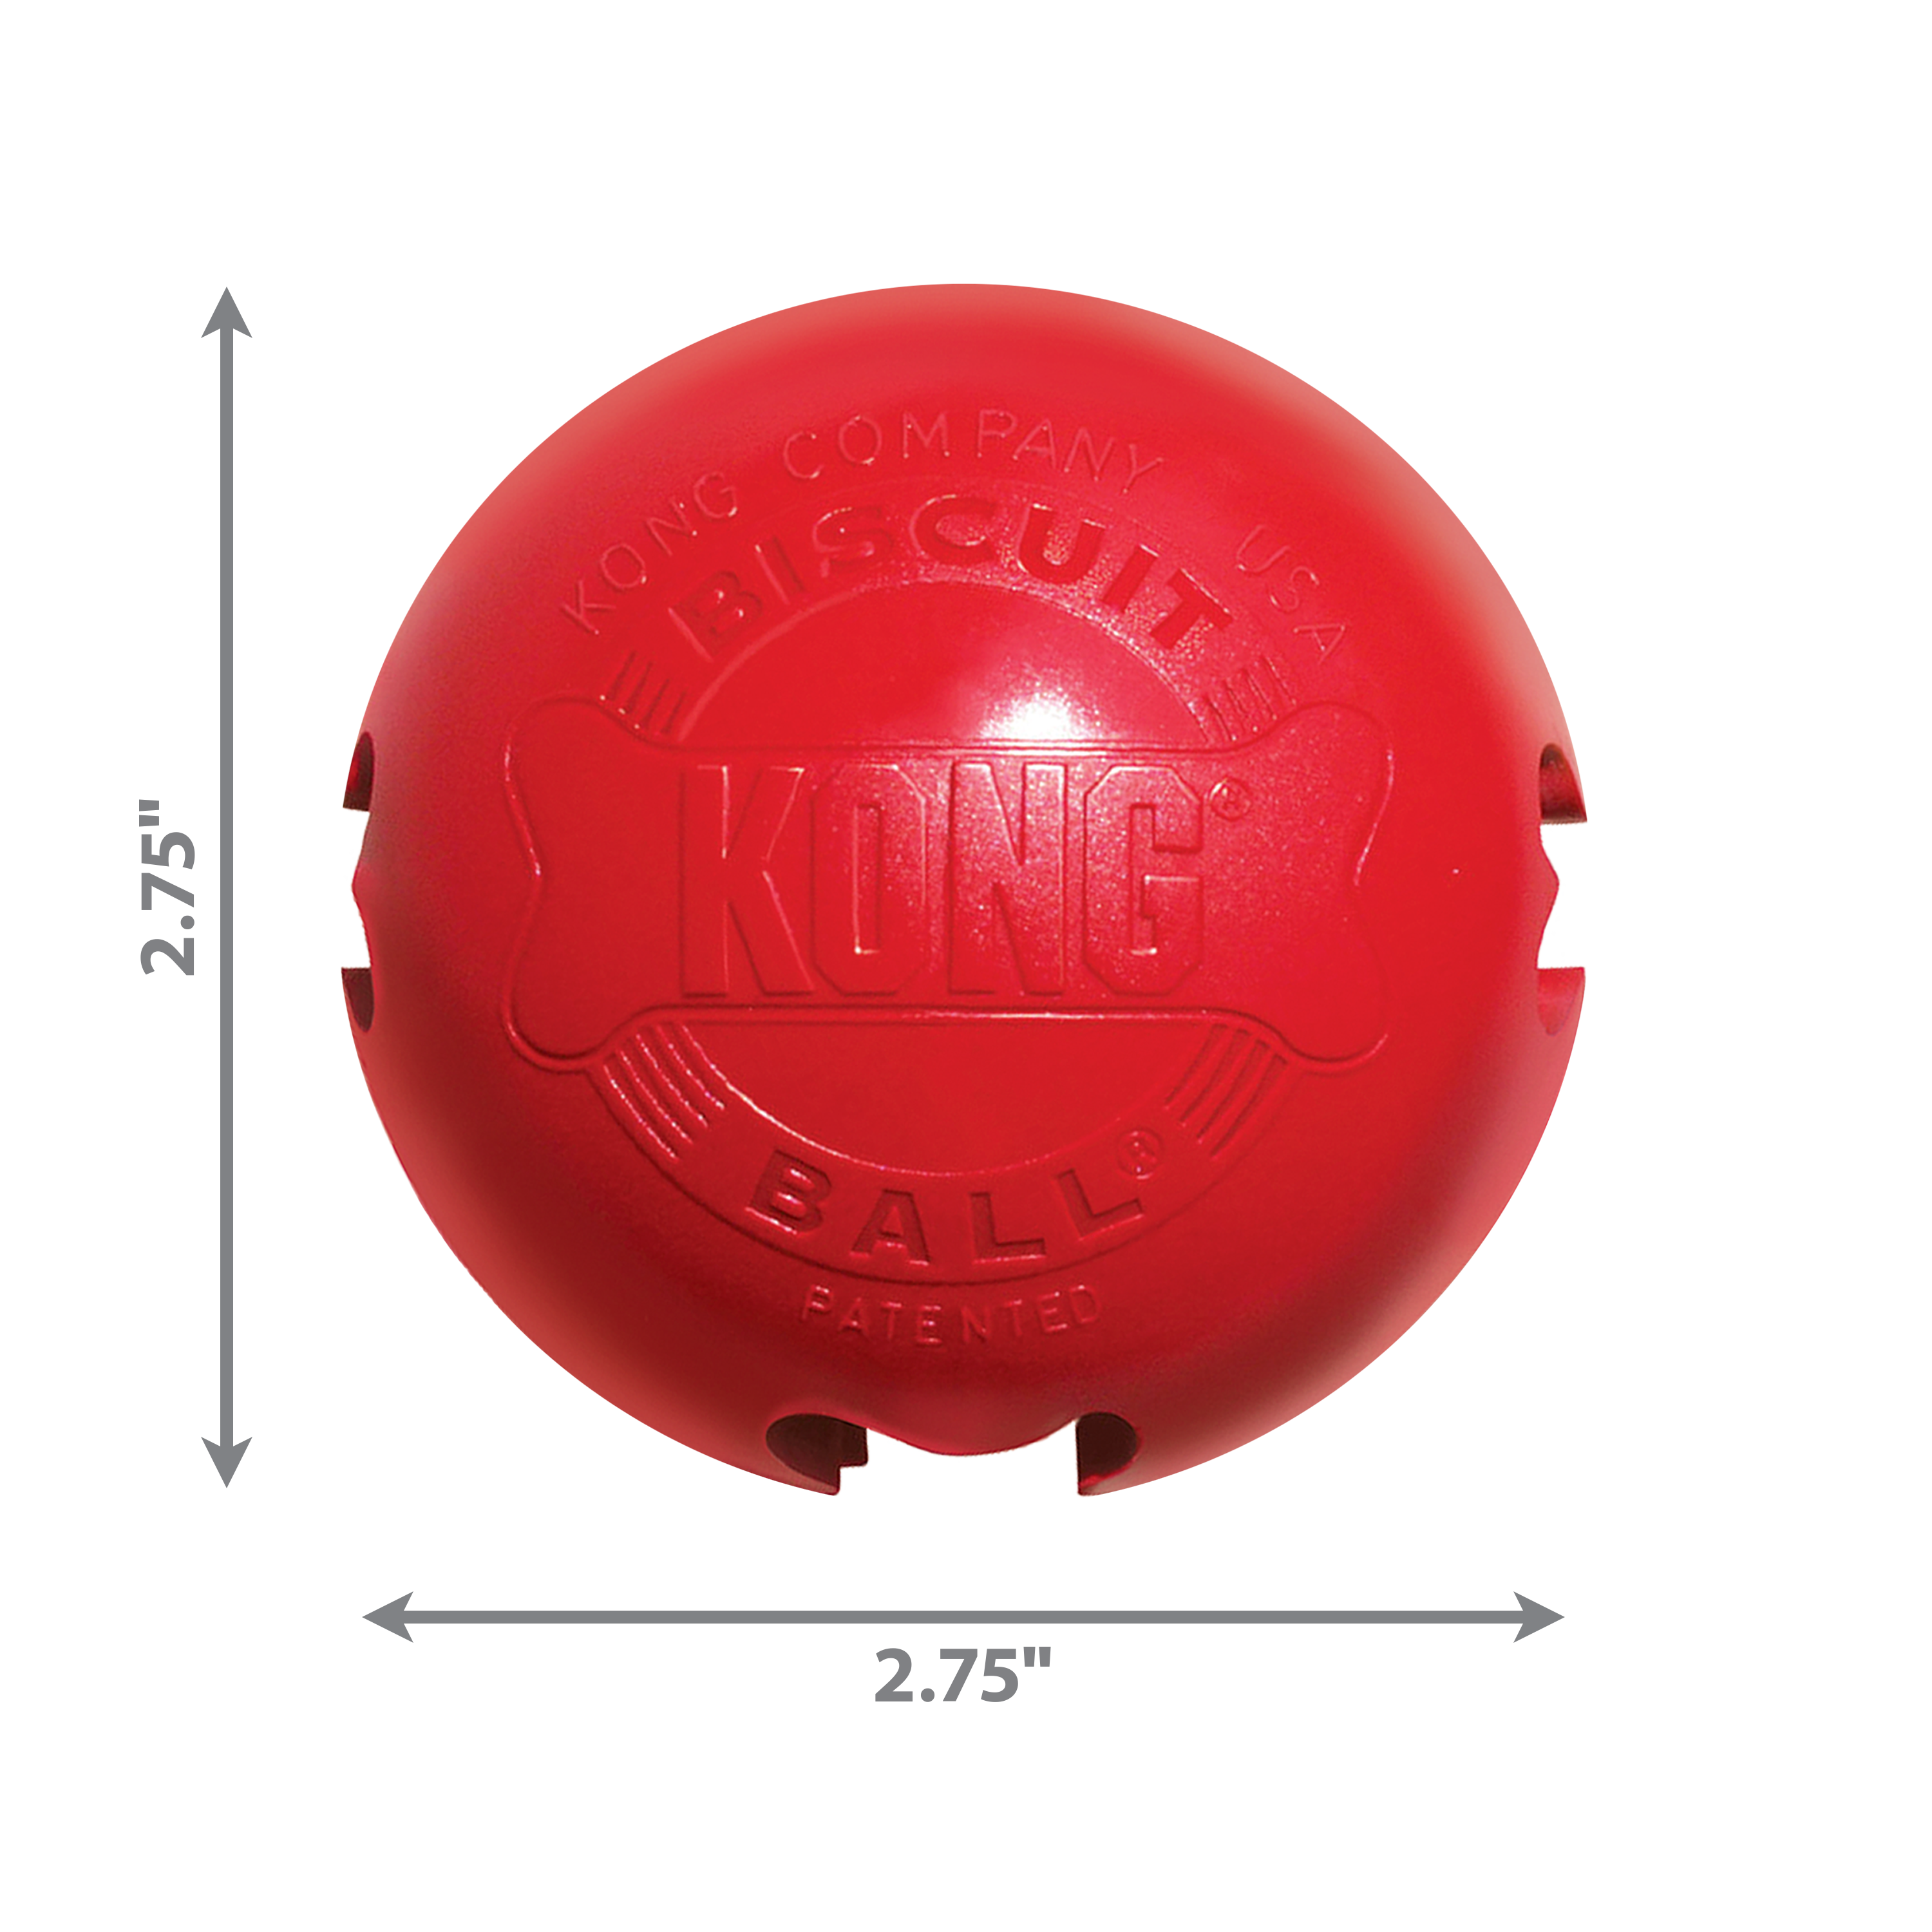 KONG Biscuit Ball dimoffpack product image